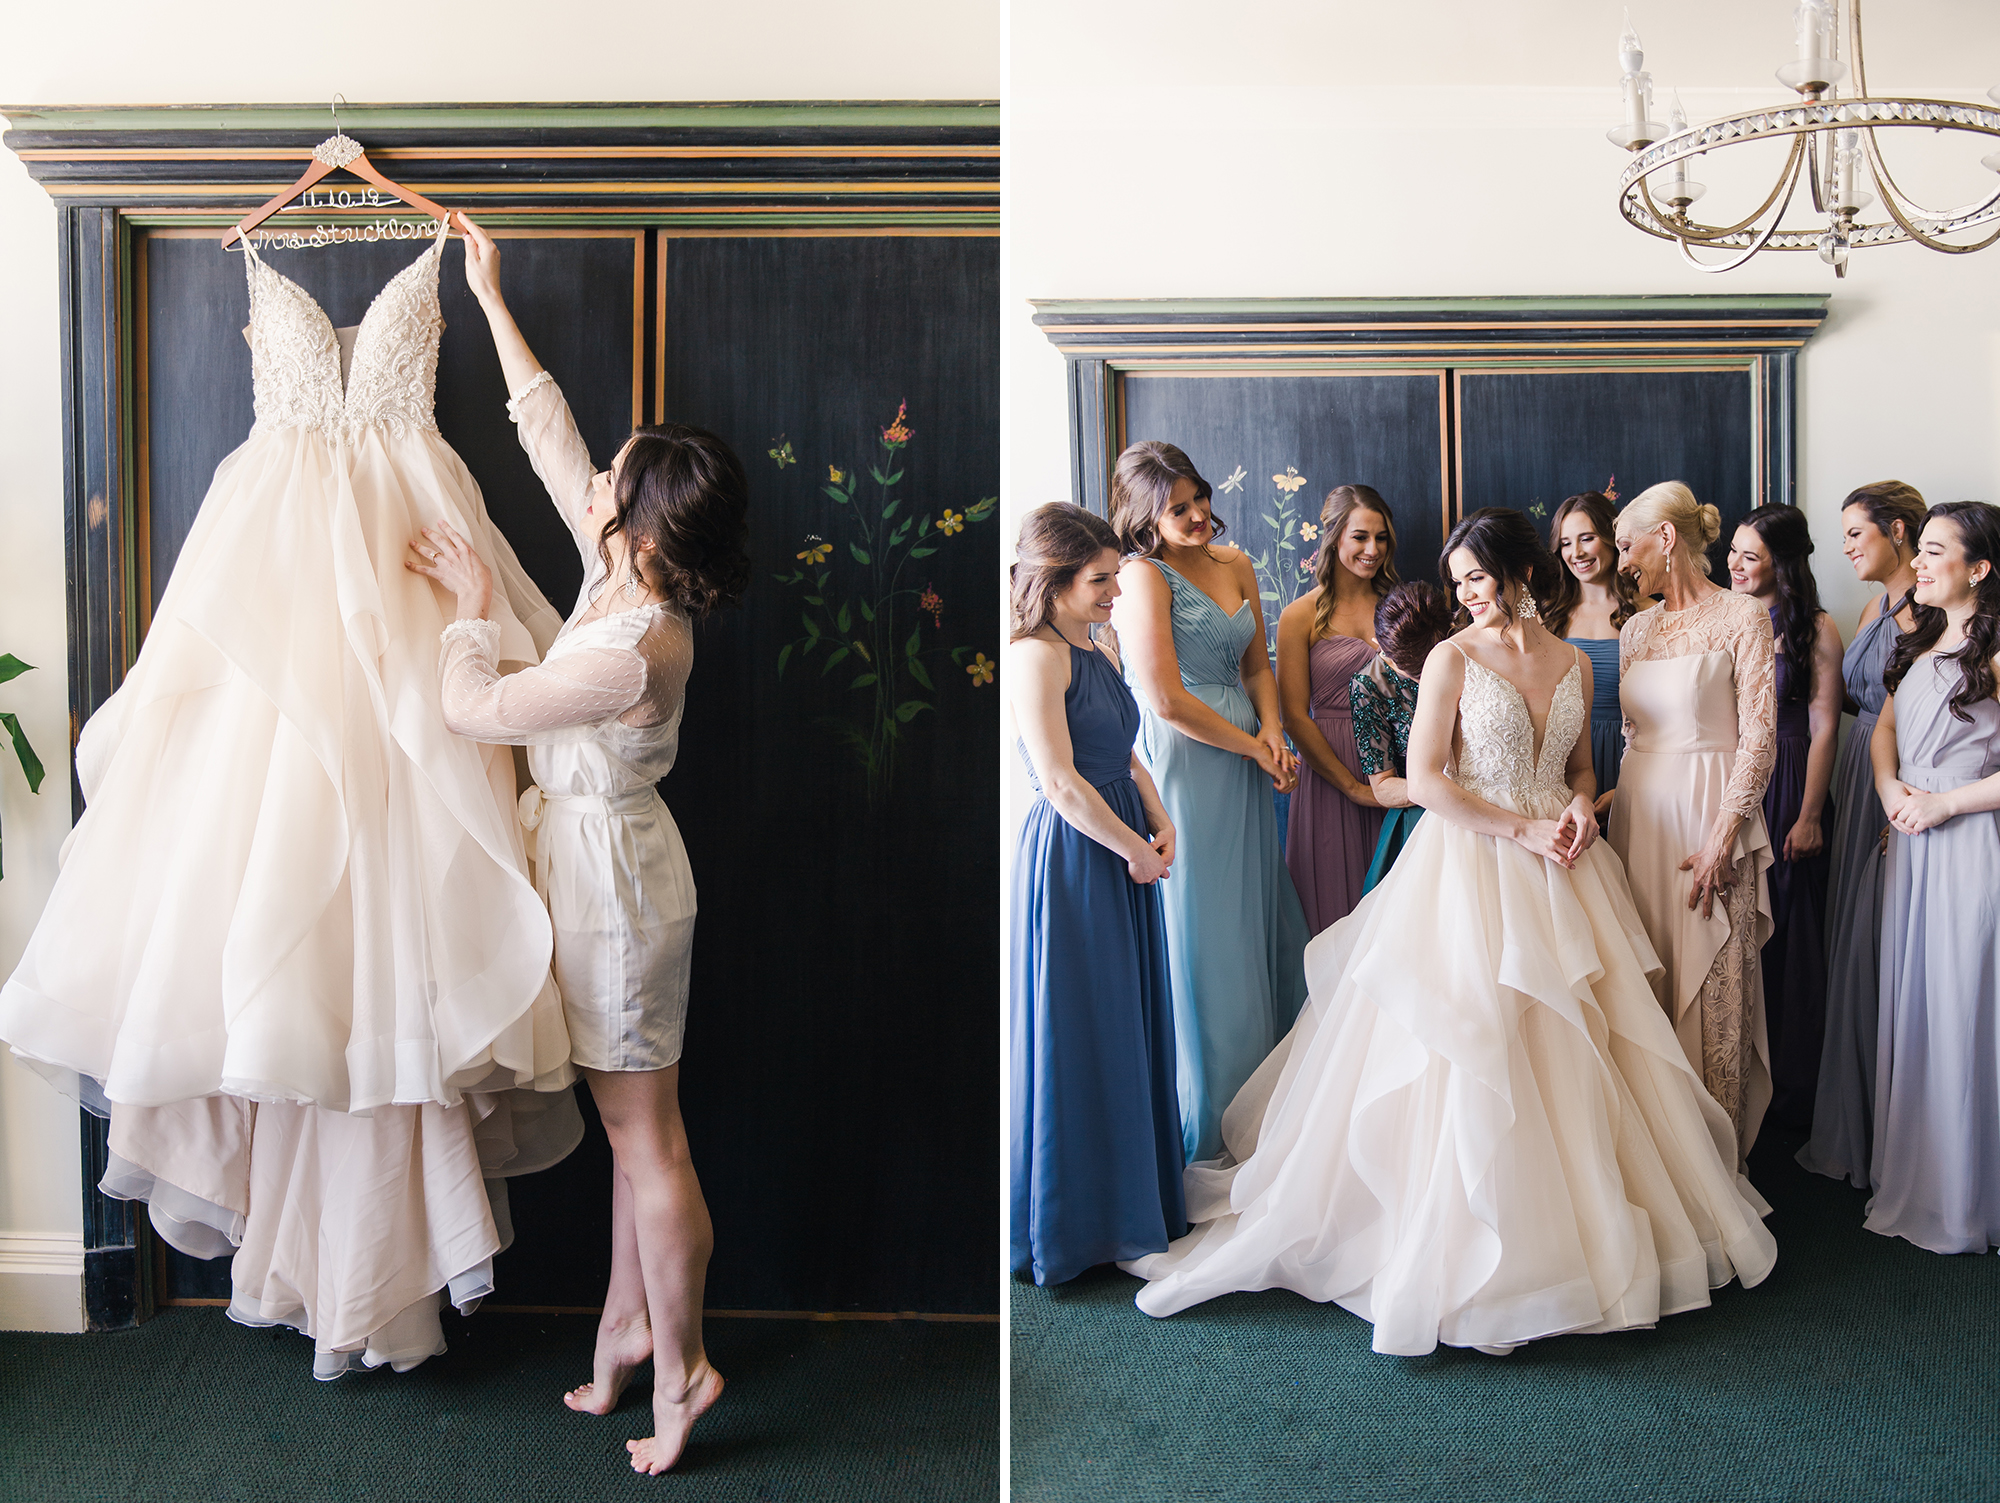 Bride with gown; Bride with bridesmaids